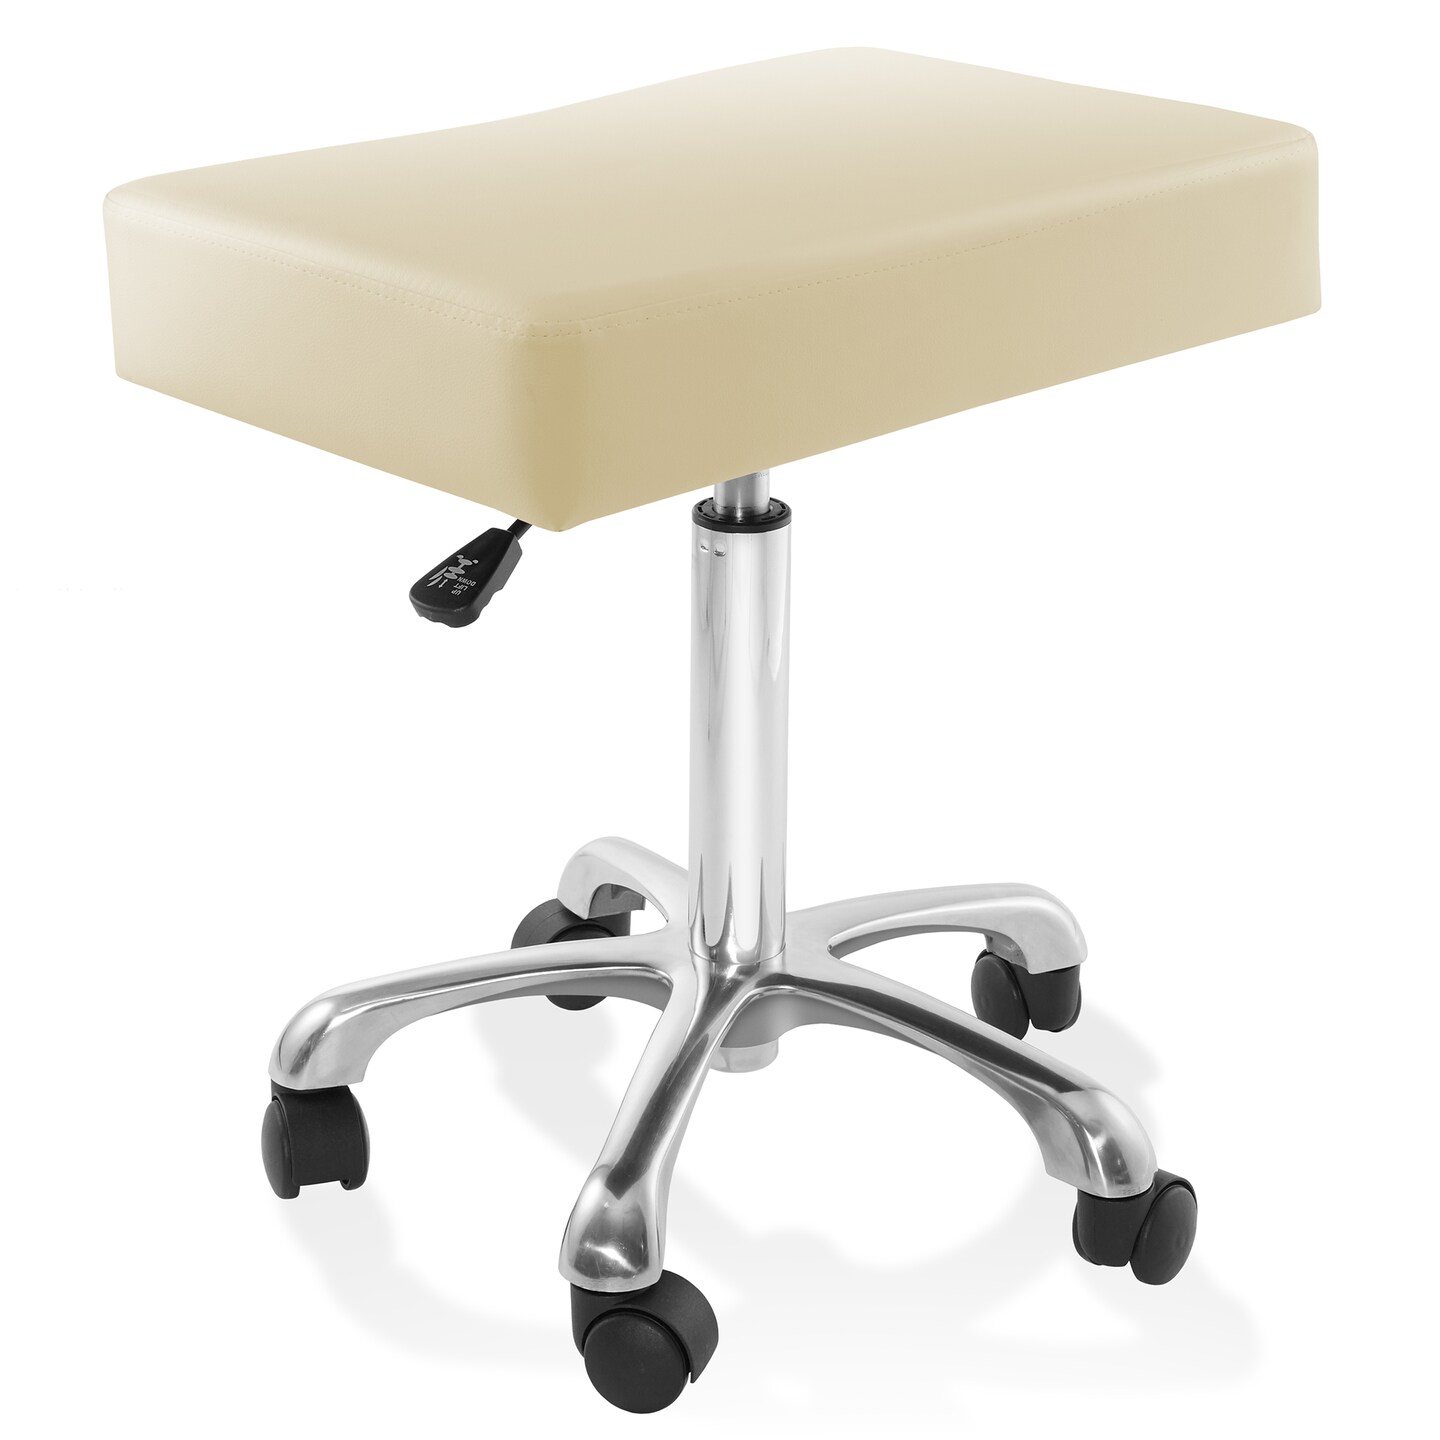 Saloniture Rolling Hydraulic Salon Stool with Large Seat - Adjustable Swivel Chair for Spa, Shop, Salon, Massage, Medical, Work or Office